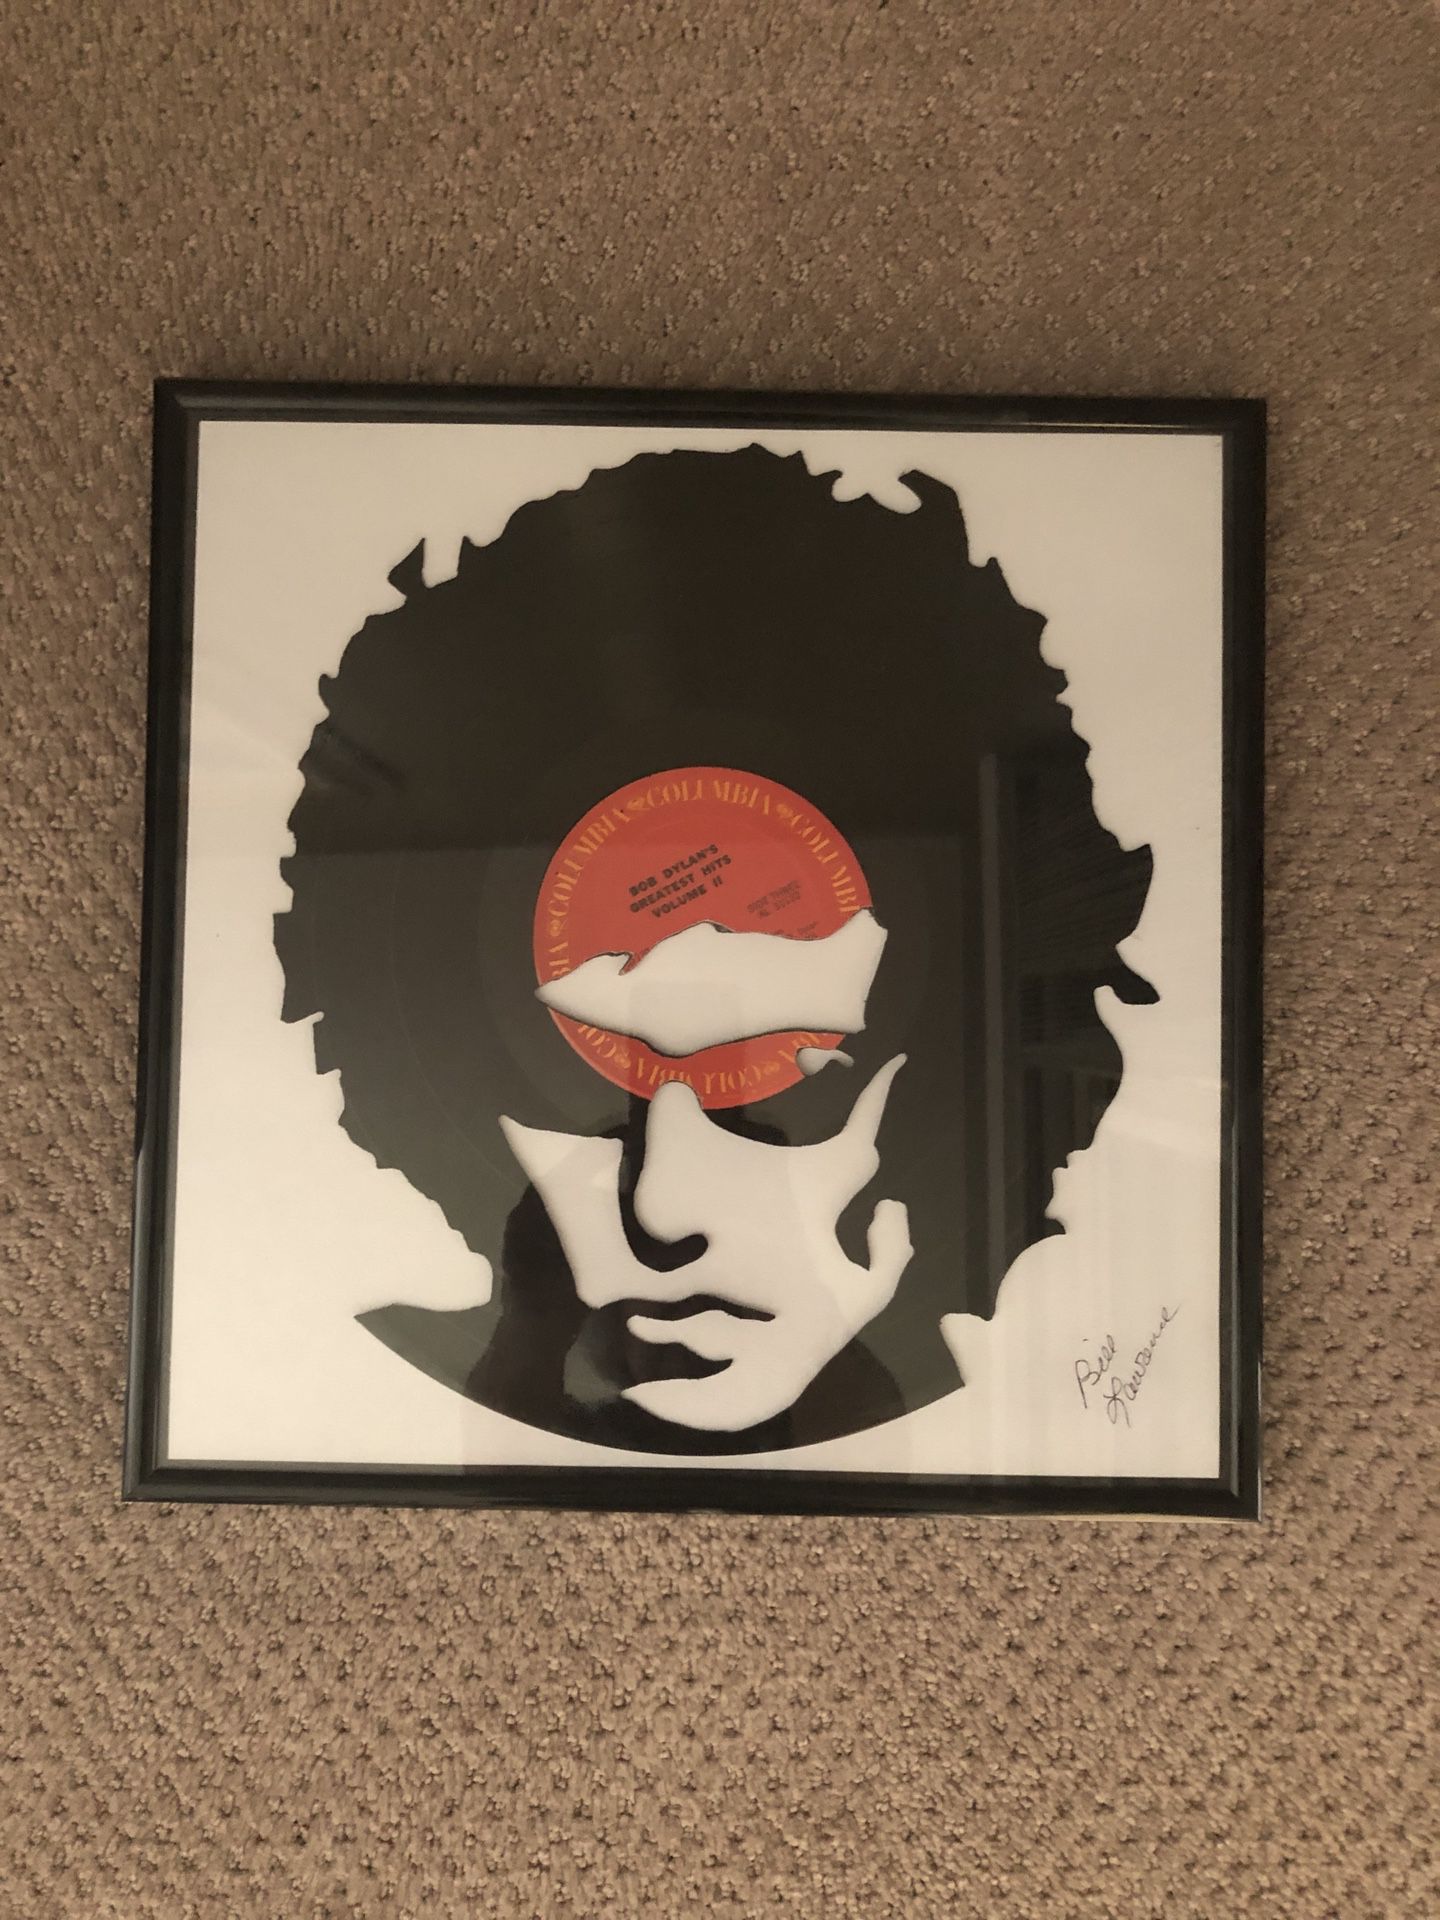 Bob Dylan art made from vinyl greatest hits record